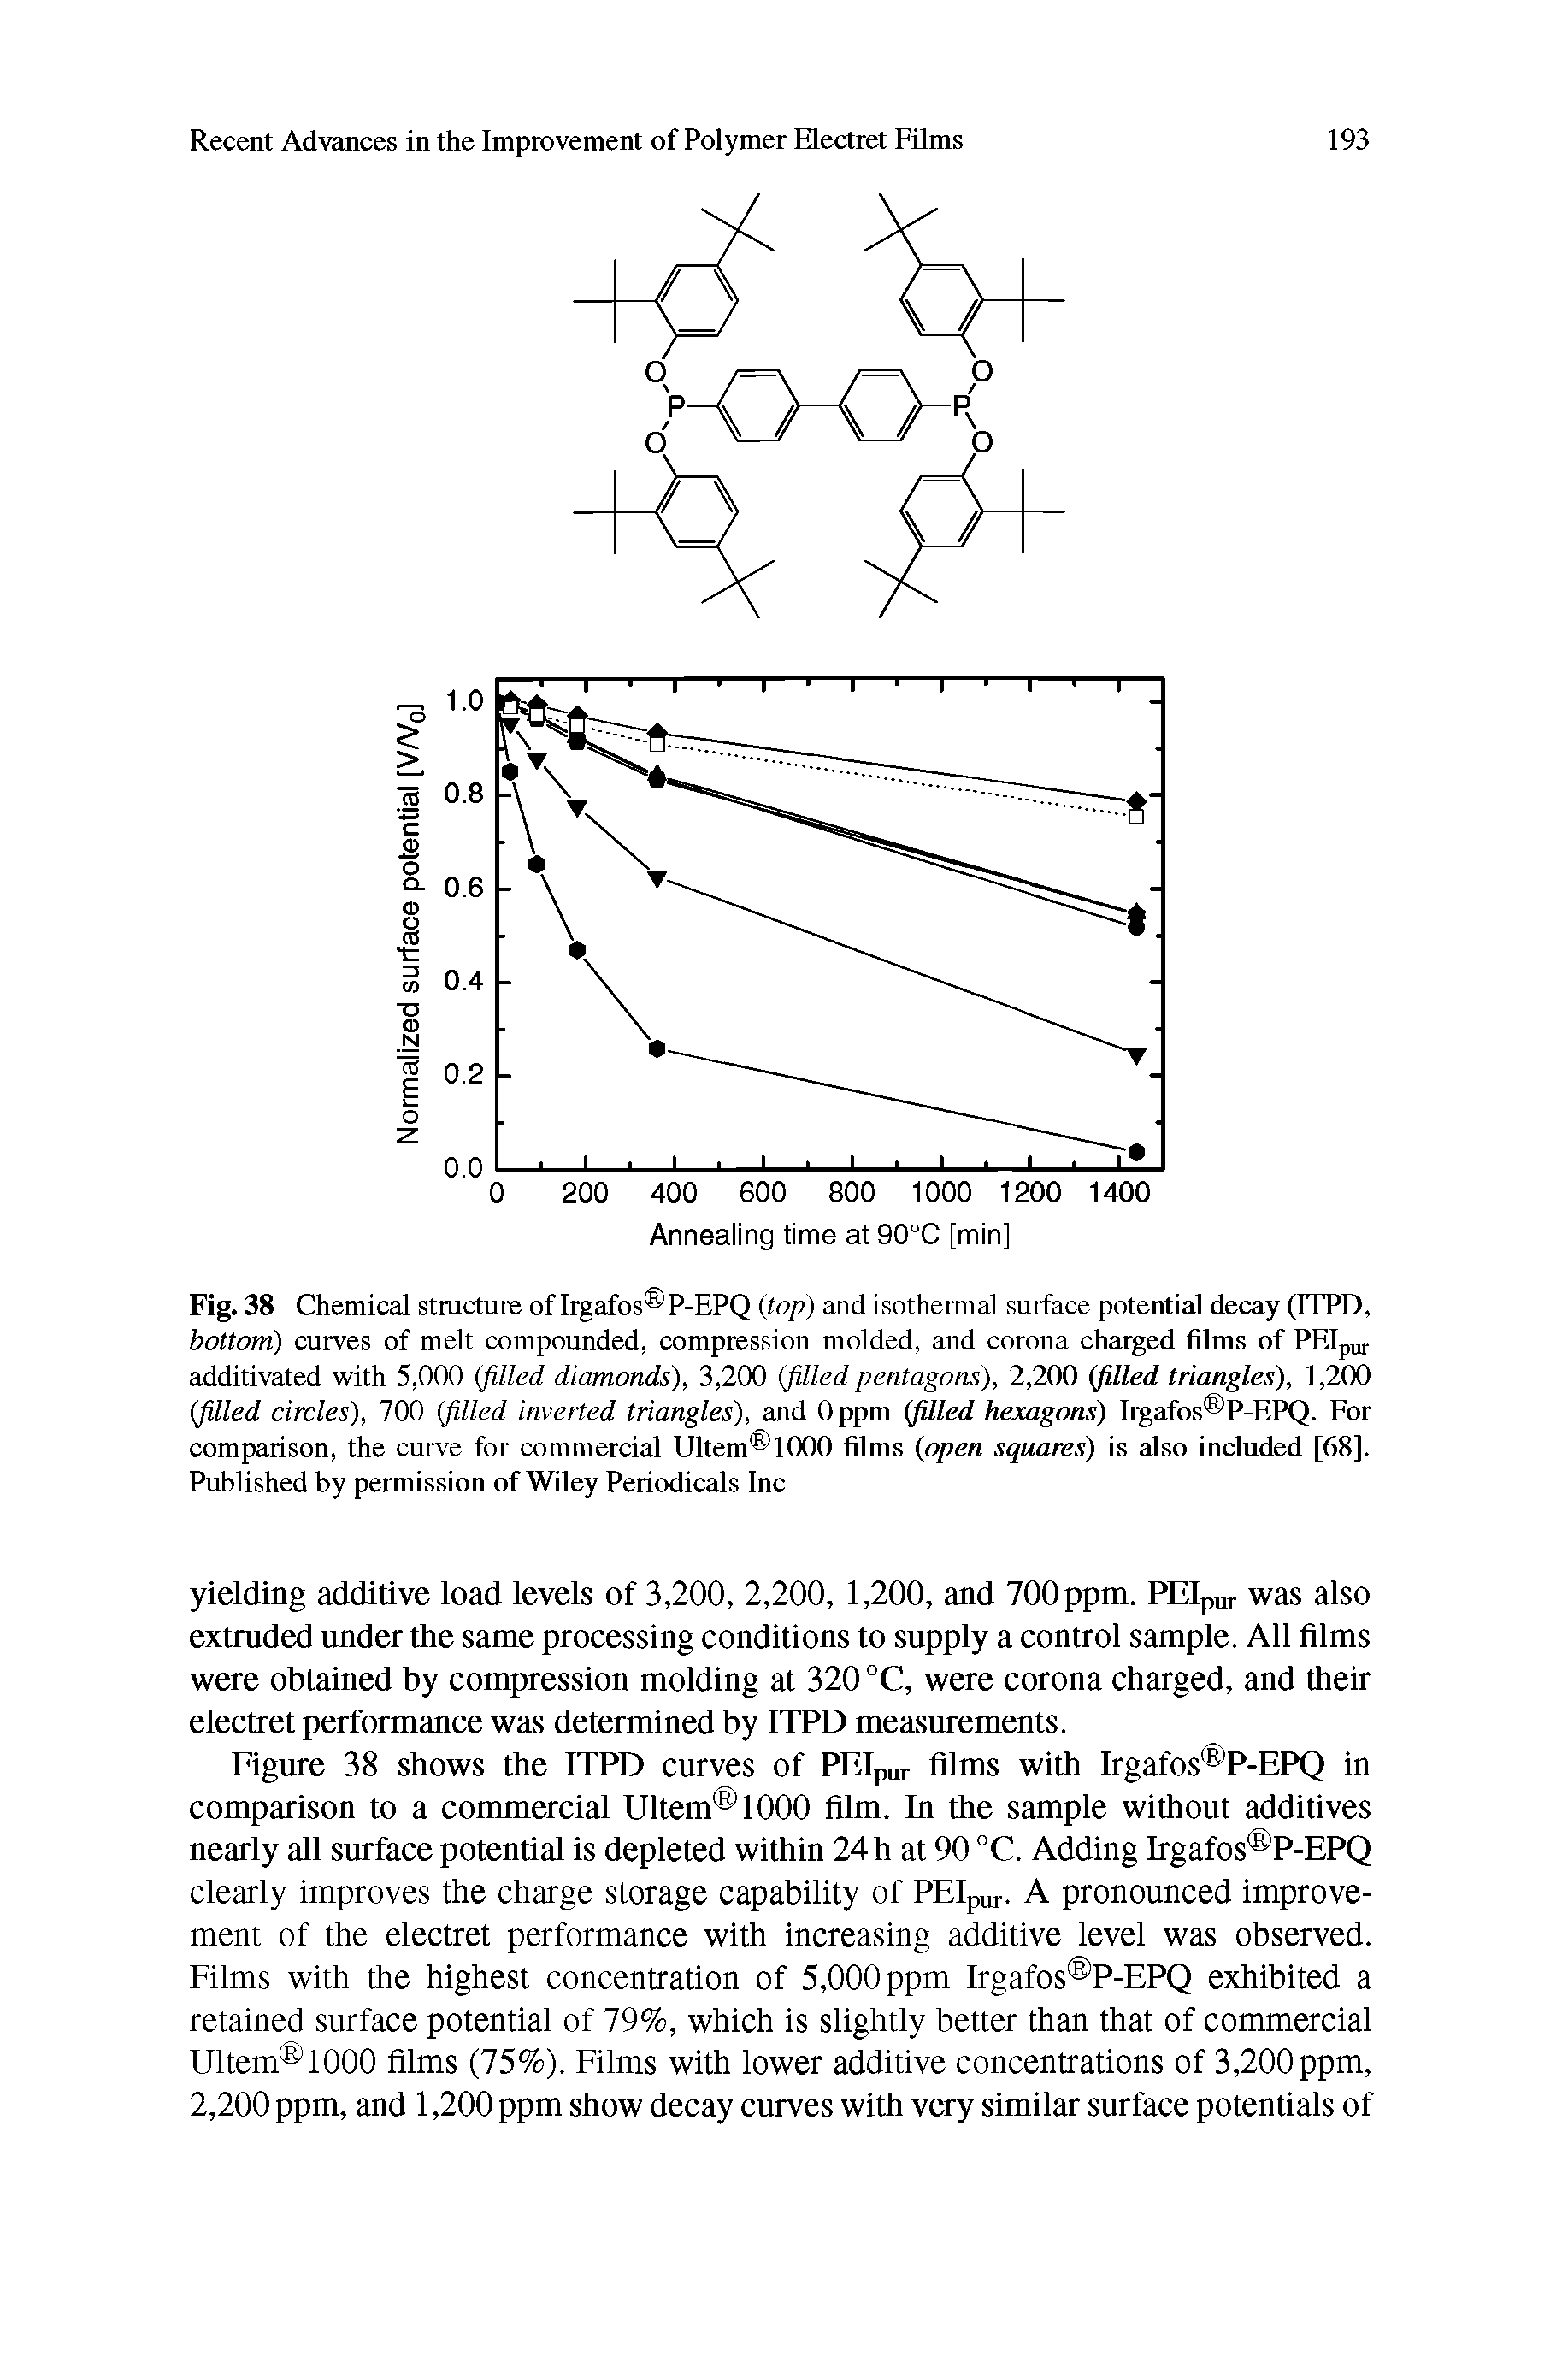 Fig. 38 Chemical structure of Irgafos P-EPQ top) and isothermal surface potential decay (ITPD, bottom) curves of melt compounded, compression molded, and corona charged films of PEIpur additivated with 5,000 (filled diamonds), 3,200 (filledpentagons), 2,200 (filled triangles), 1,200 (filled circles), 700 (filled inverted triangles), and Oppm (filled hexagons) Irgafos P-EPQ. For comparison, the curve for commercial Ultem 1000 films (open squares) is also included [68]. Published by permission of Wiley Periodicals Inc...